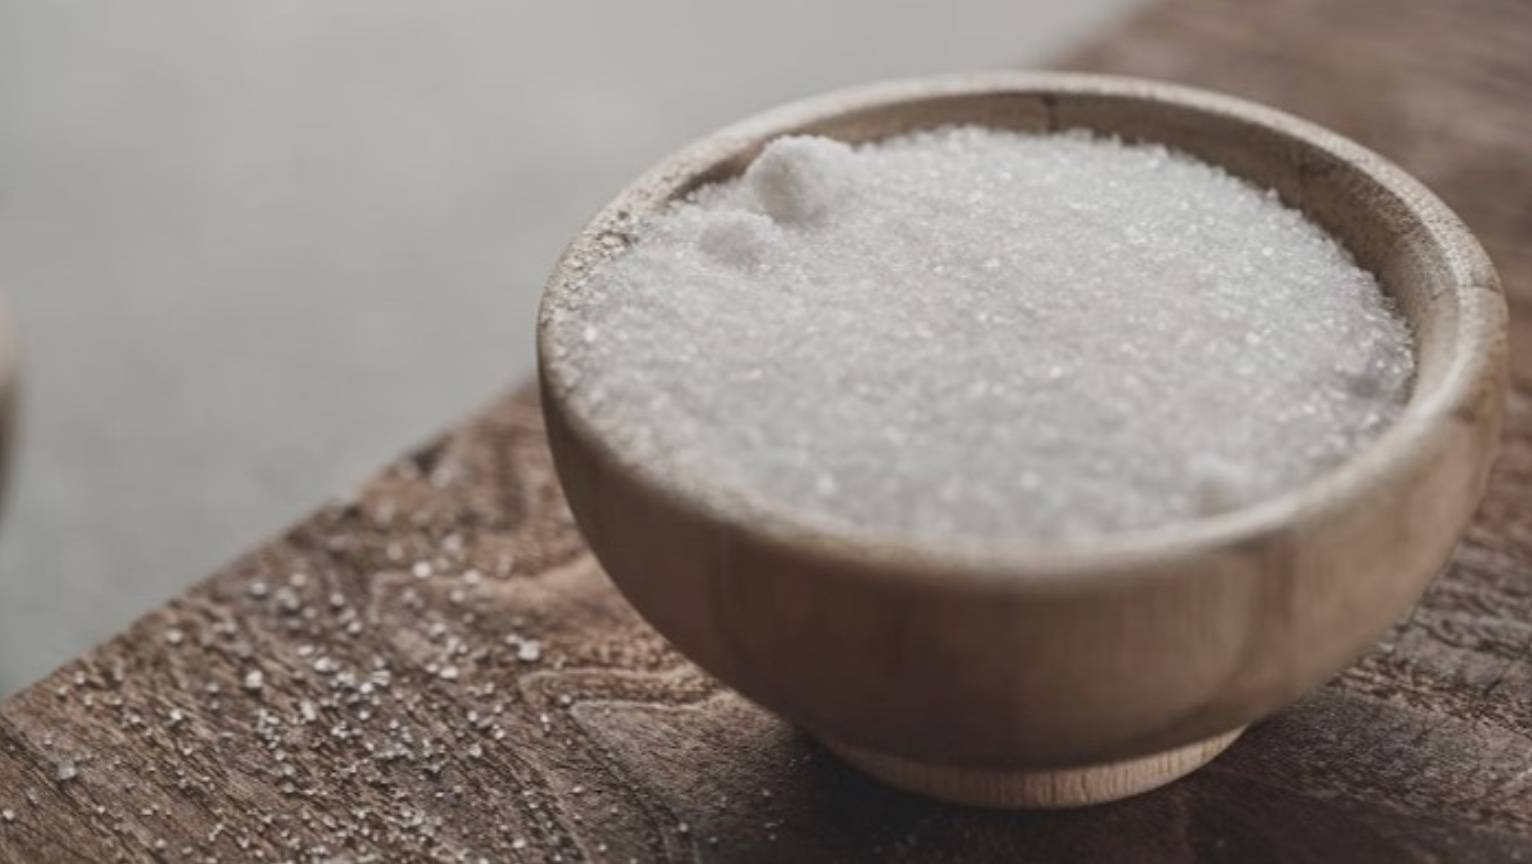  High Sugar FoodsThat Can Negatively Affect Your Health